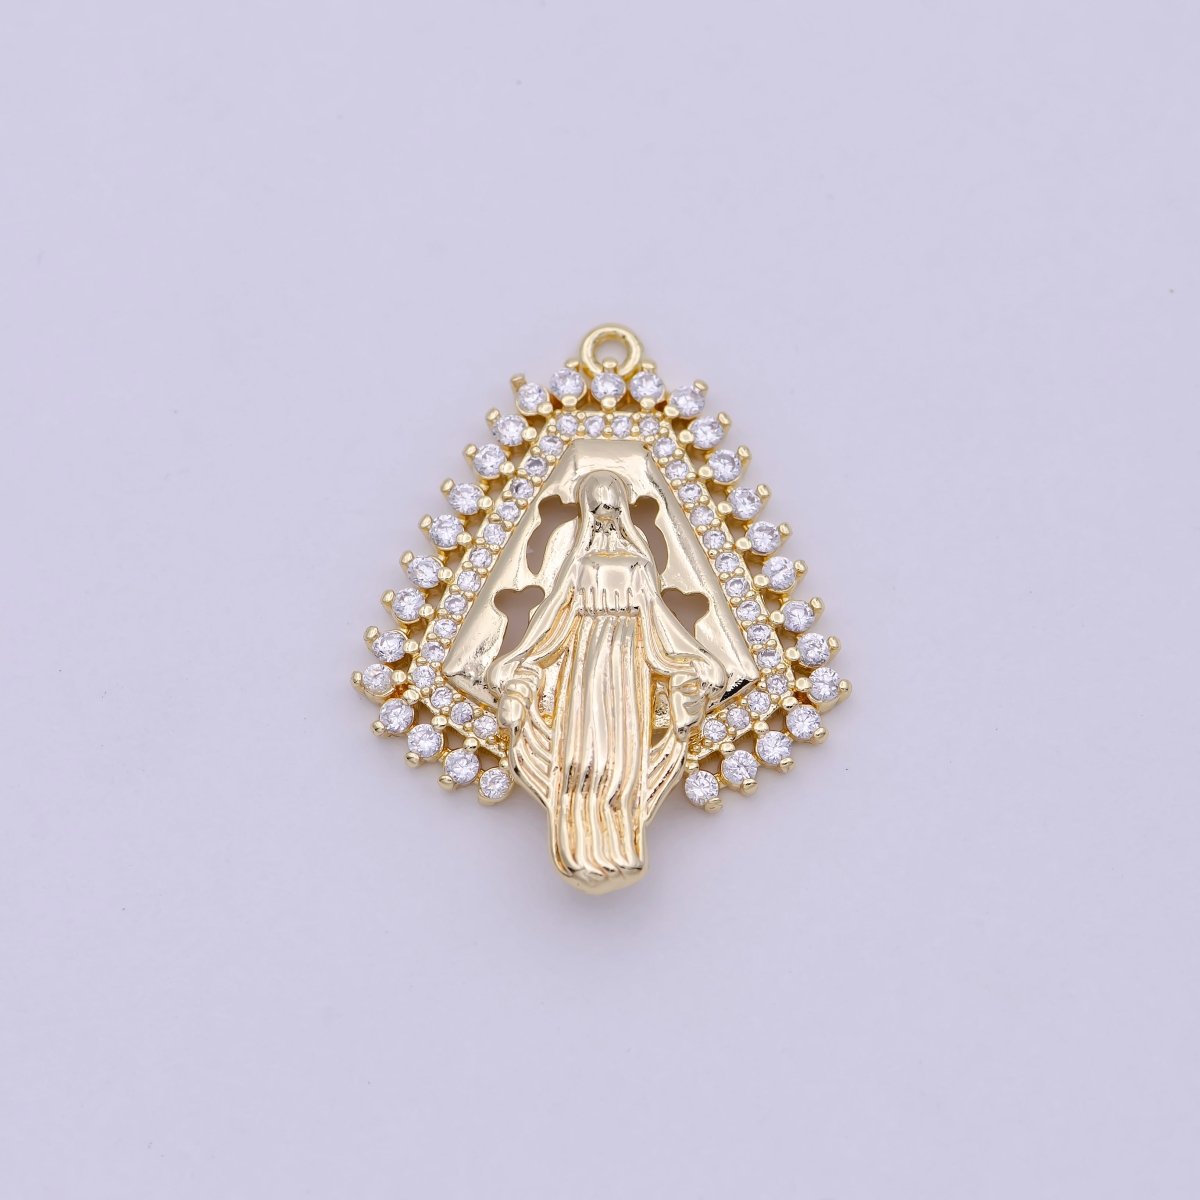 Dainty 14K Gold Filled Miraculous Lady Virgin Mary Charm Delicate Micro Pave Religious Charm N-458 - DLUXCA